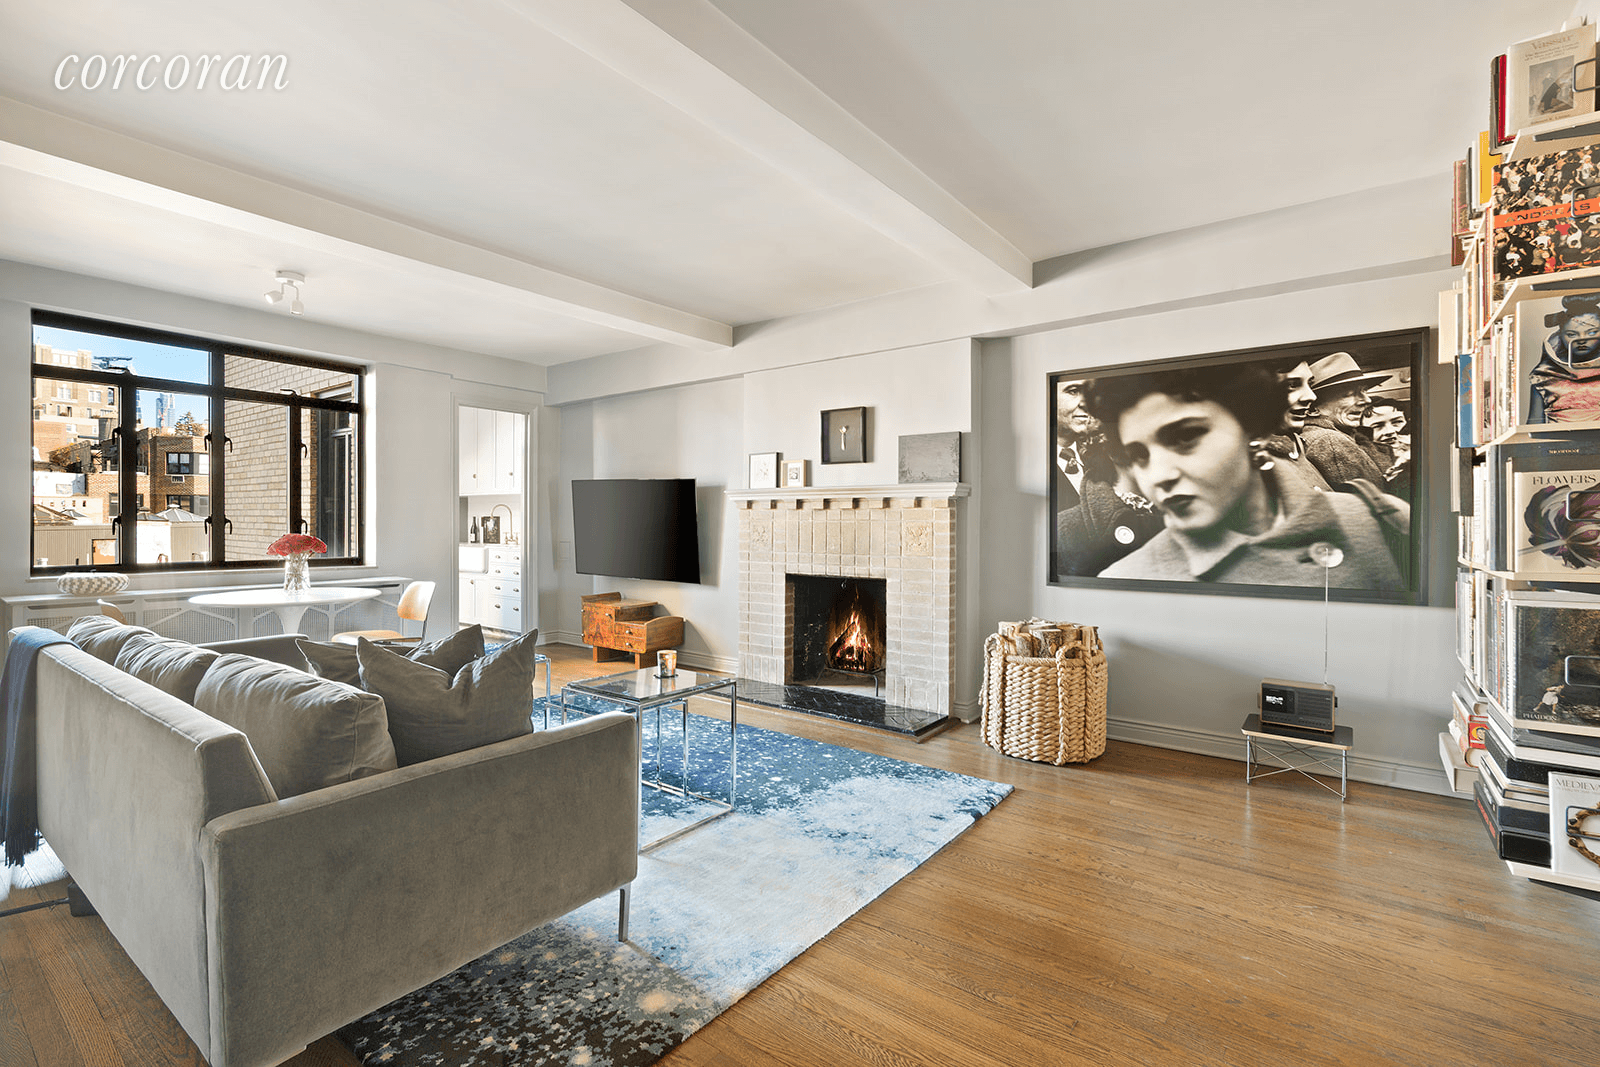 Located on one of the most prime blocks in the city, this high floor, sophisticated, completely renovated, view residence is absolute perfection.